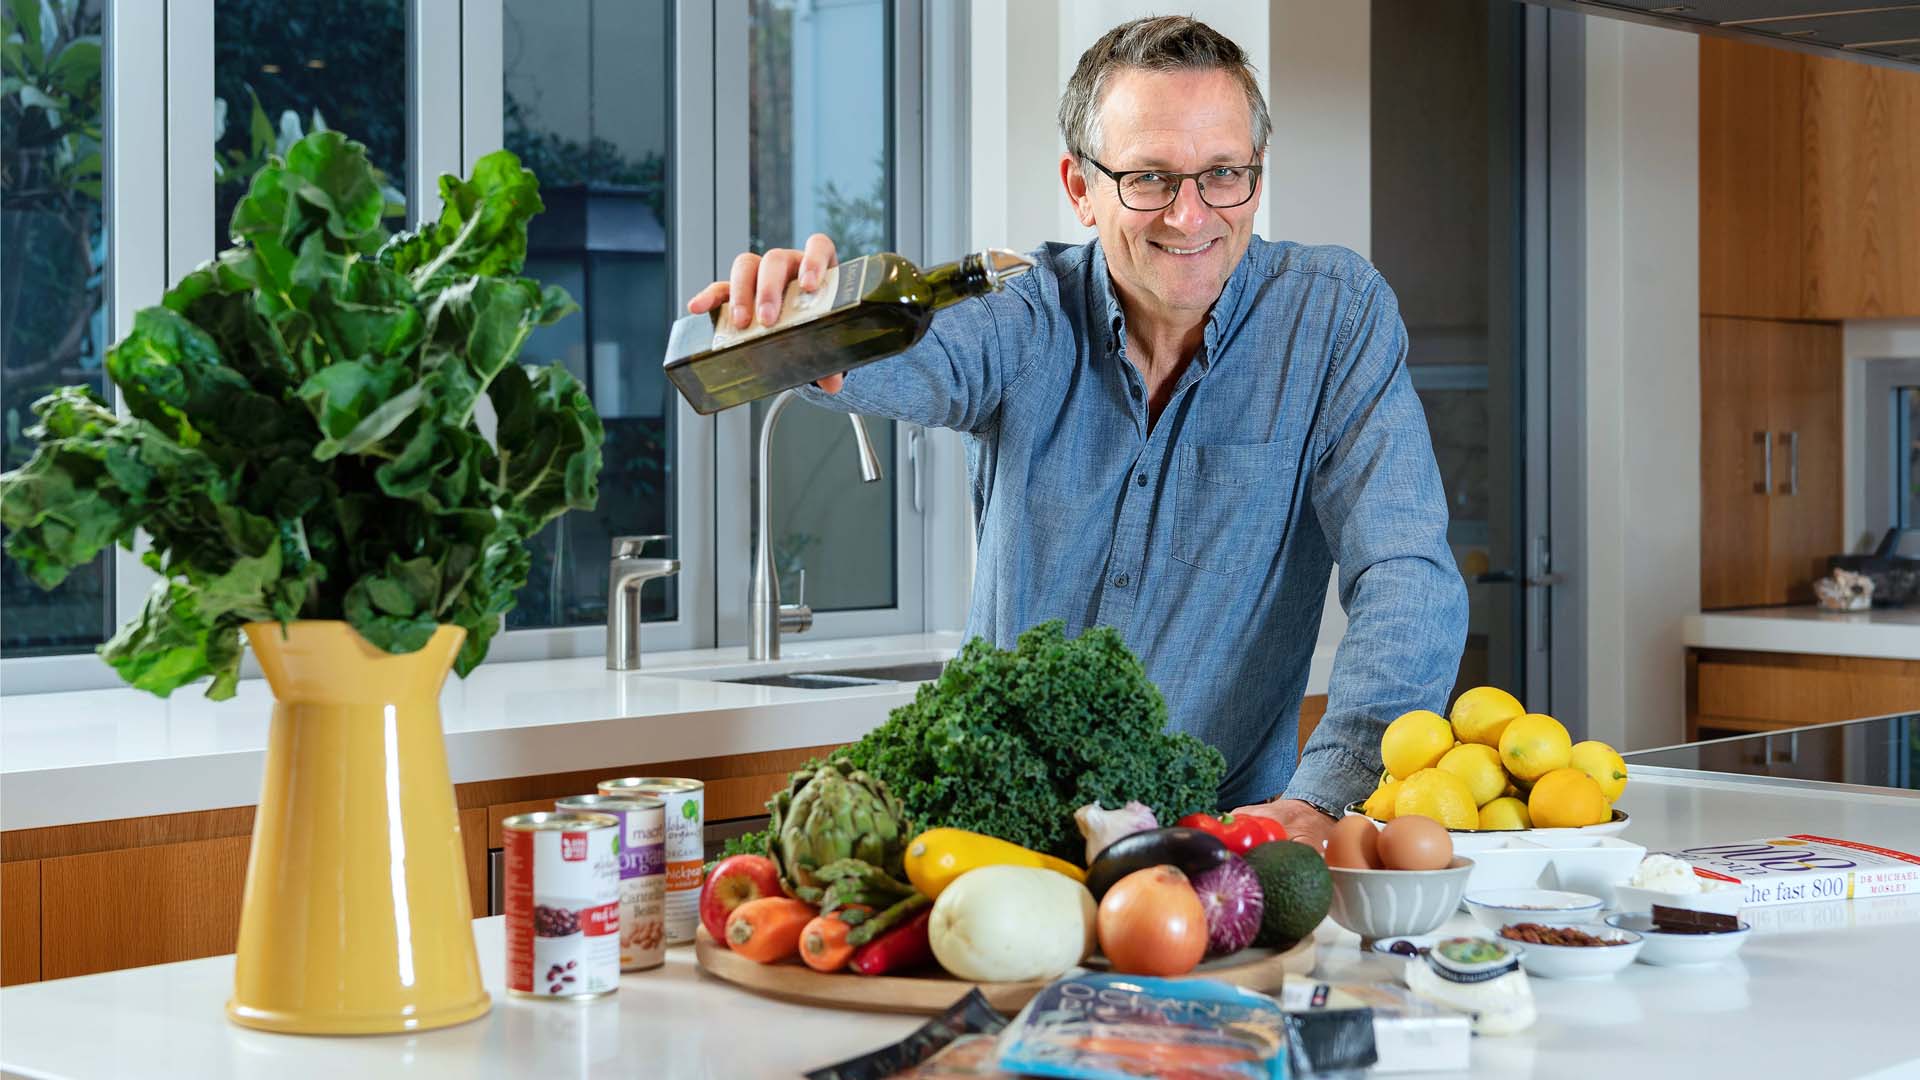 Dr Michael Mosley standing in a kitchen holding a bottle of olive oil with Mediterranean-style foods in front of him.